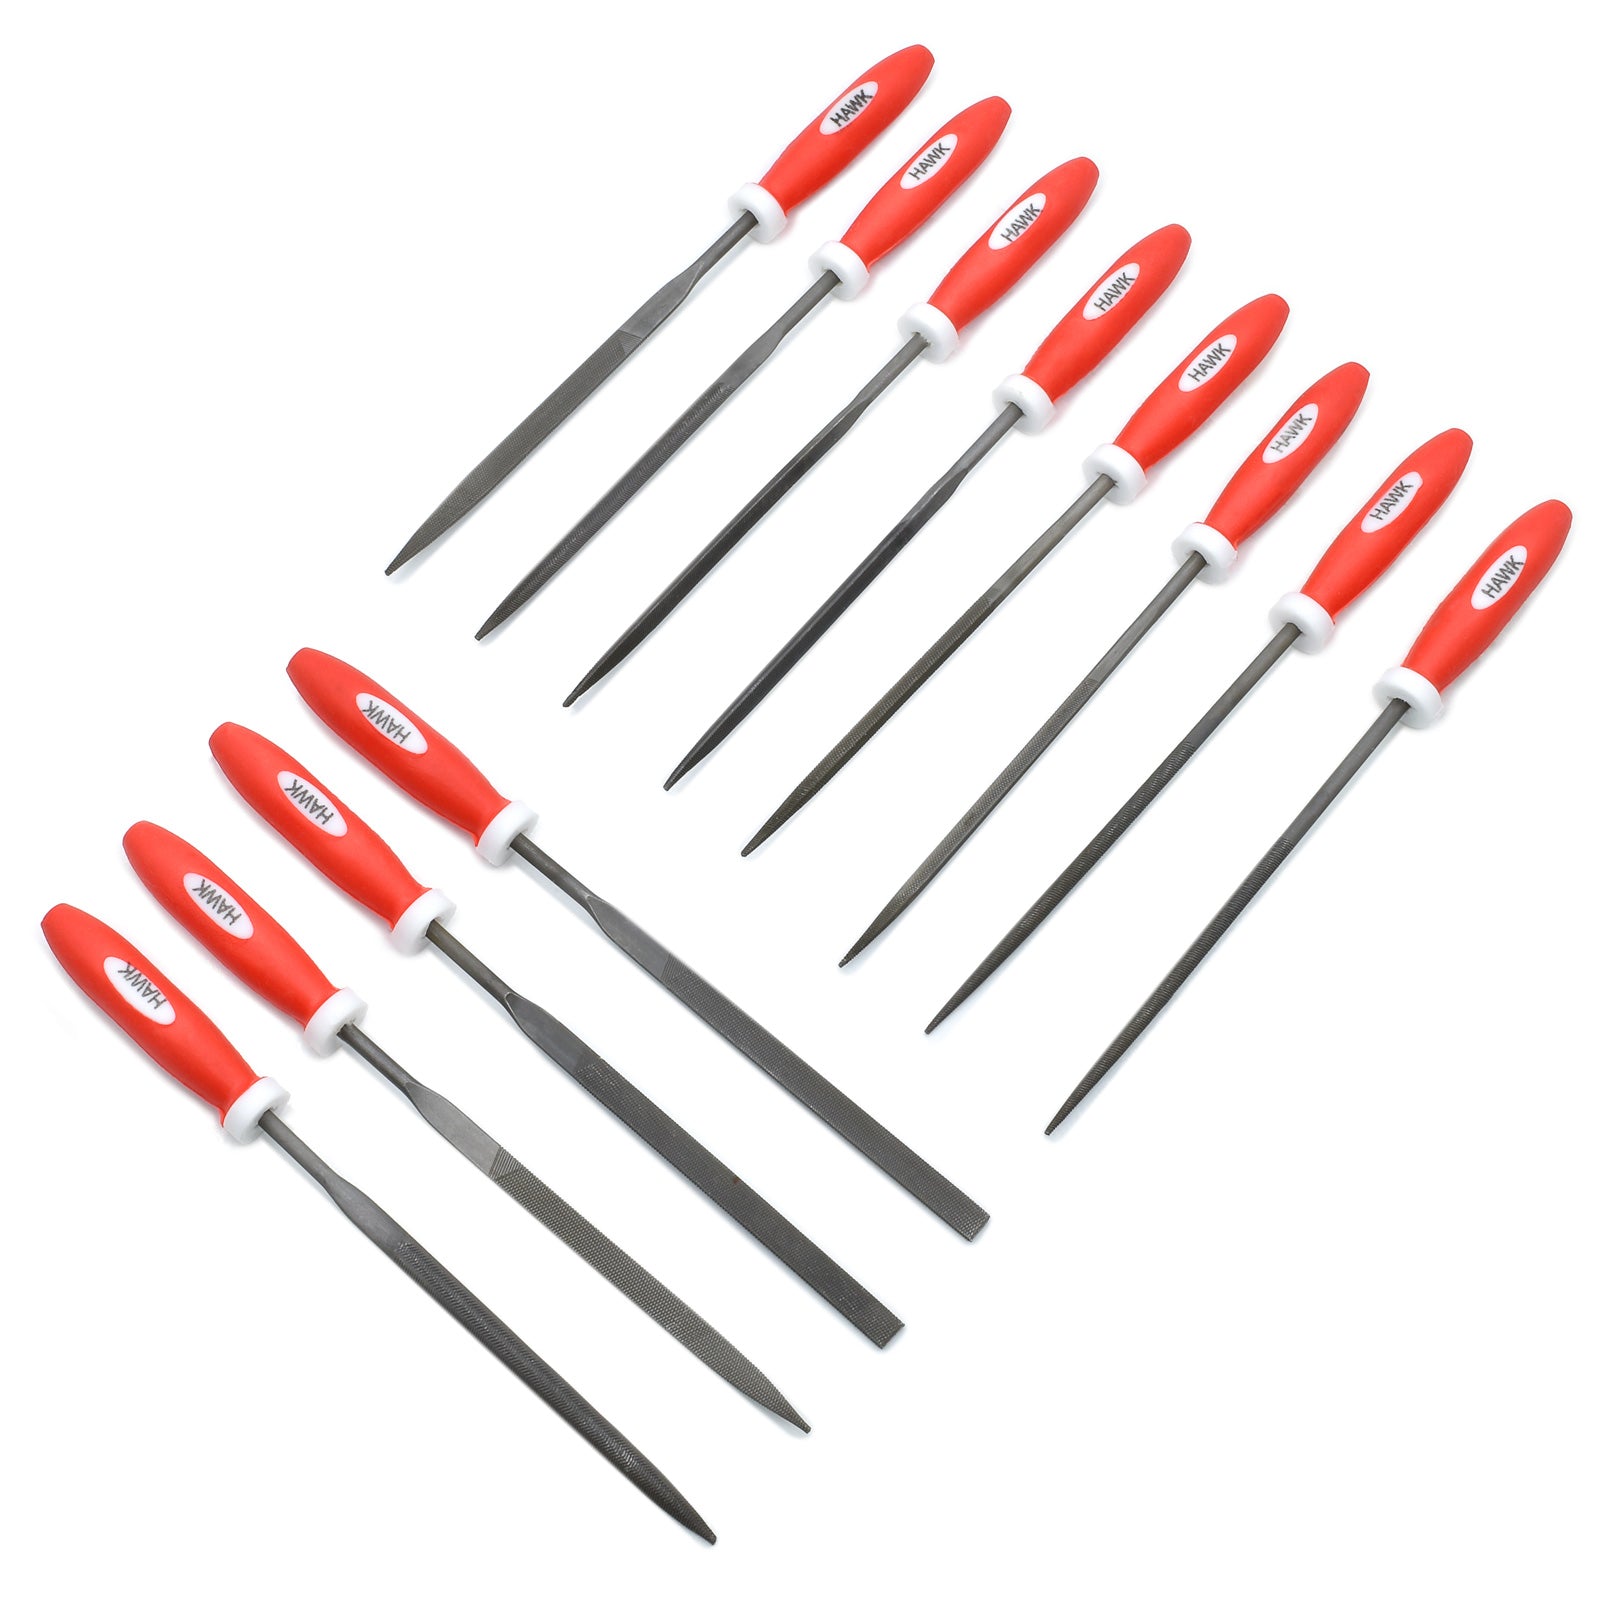 12 Pieces Pro File Set with Handles - Micro - Mark Files